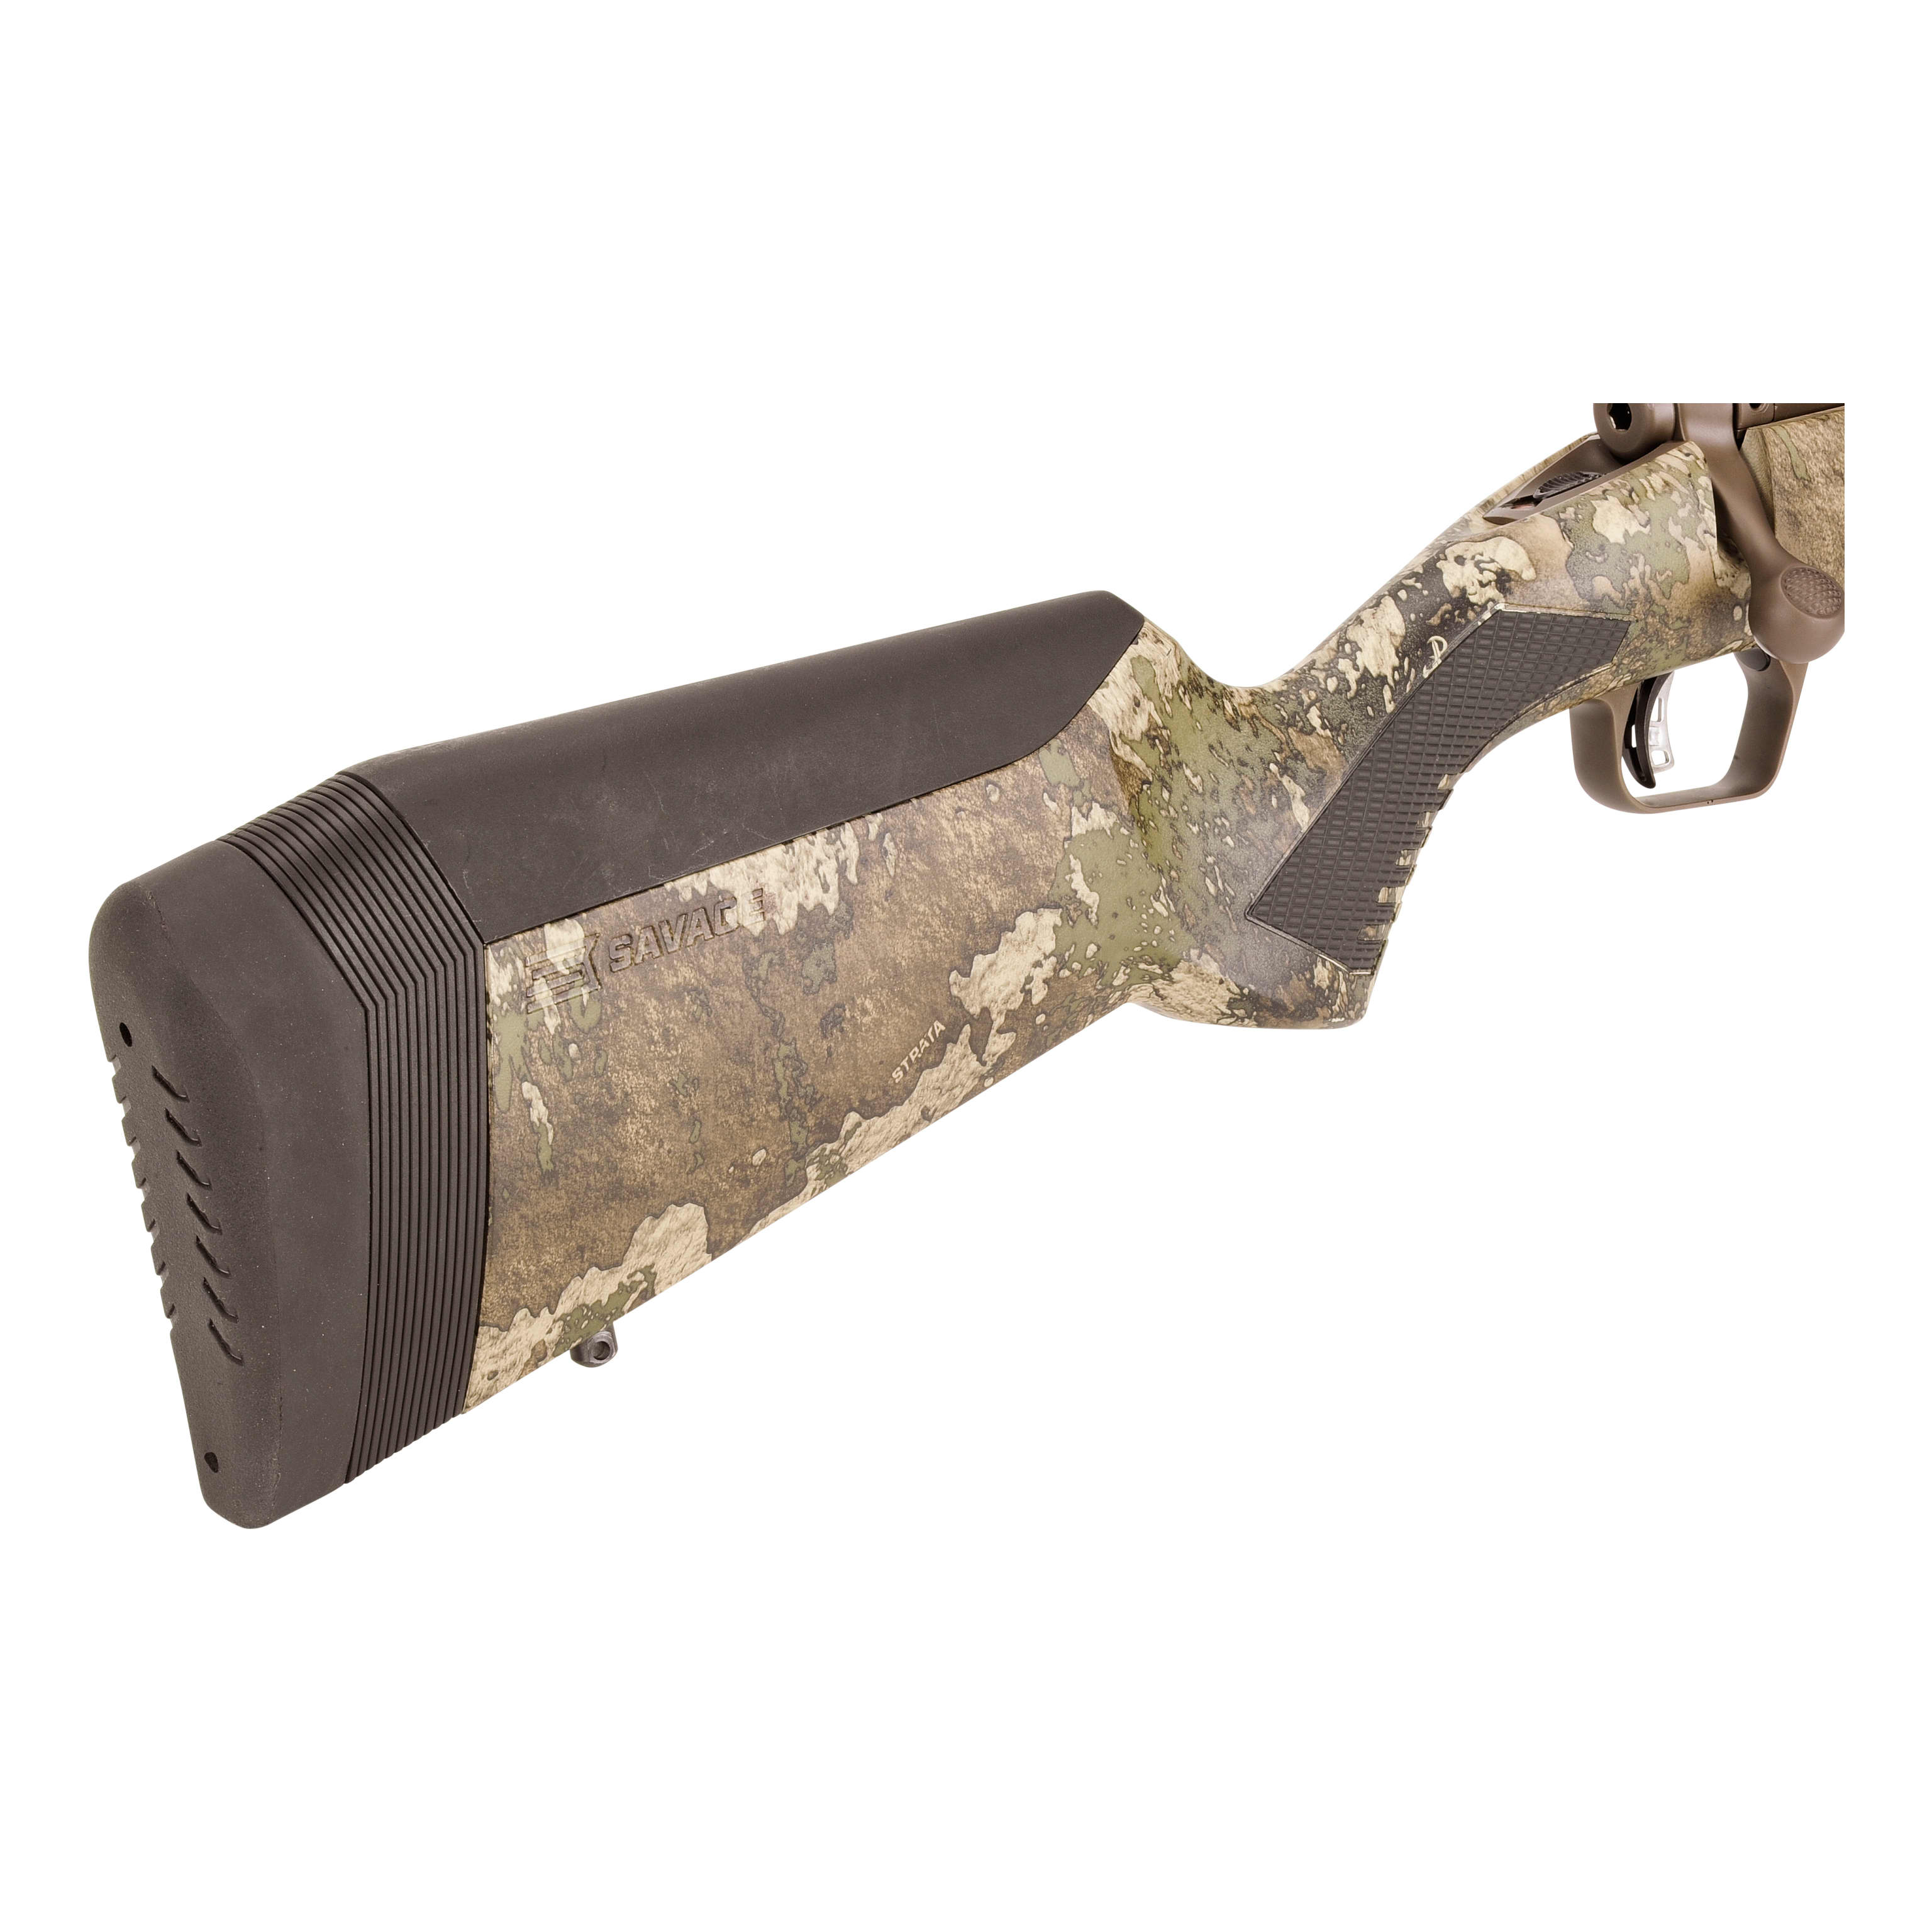 Savage® 110 High Country Bolt-Action Rifle